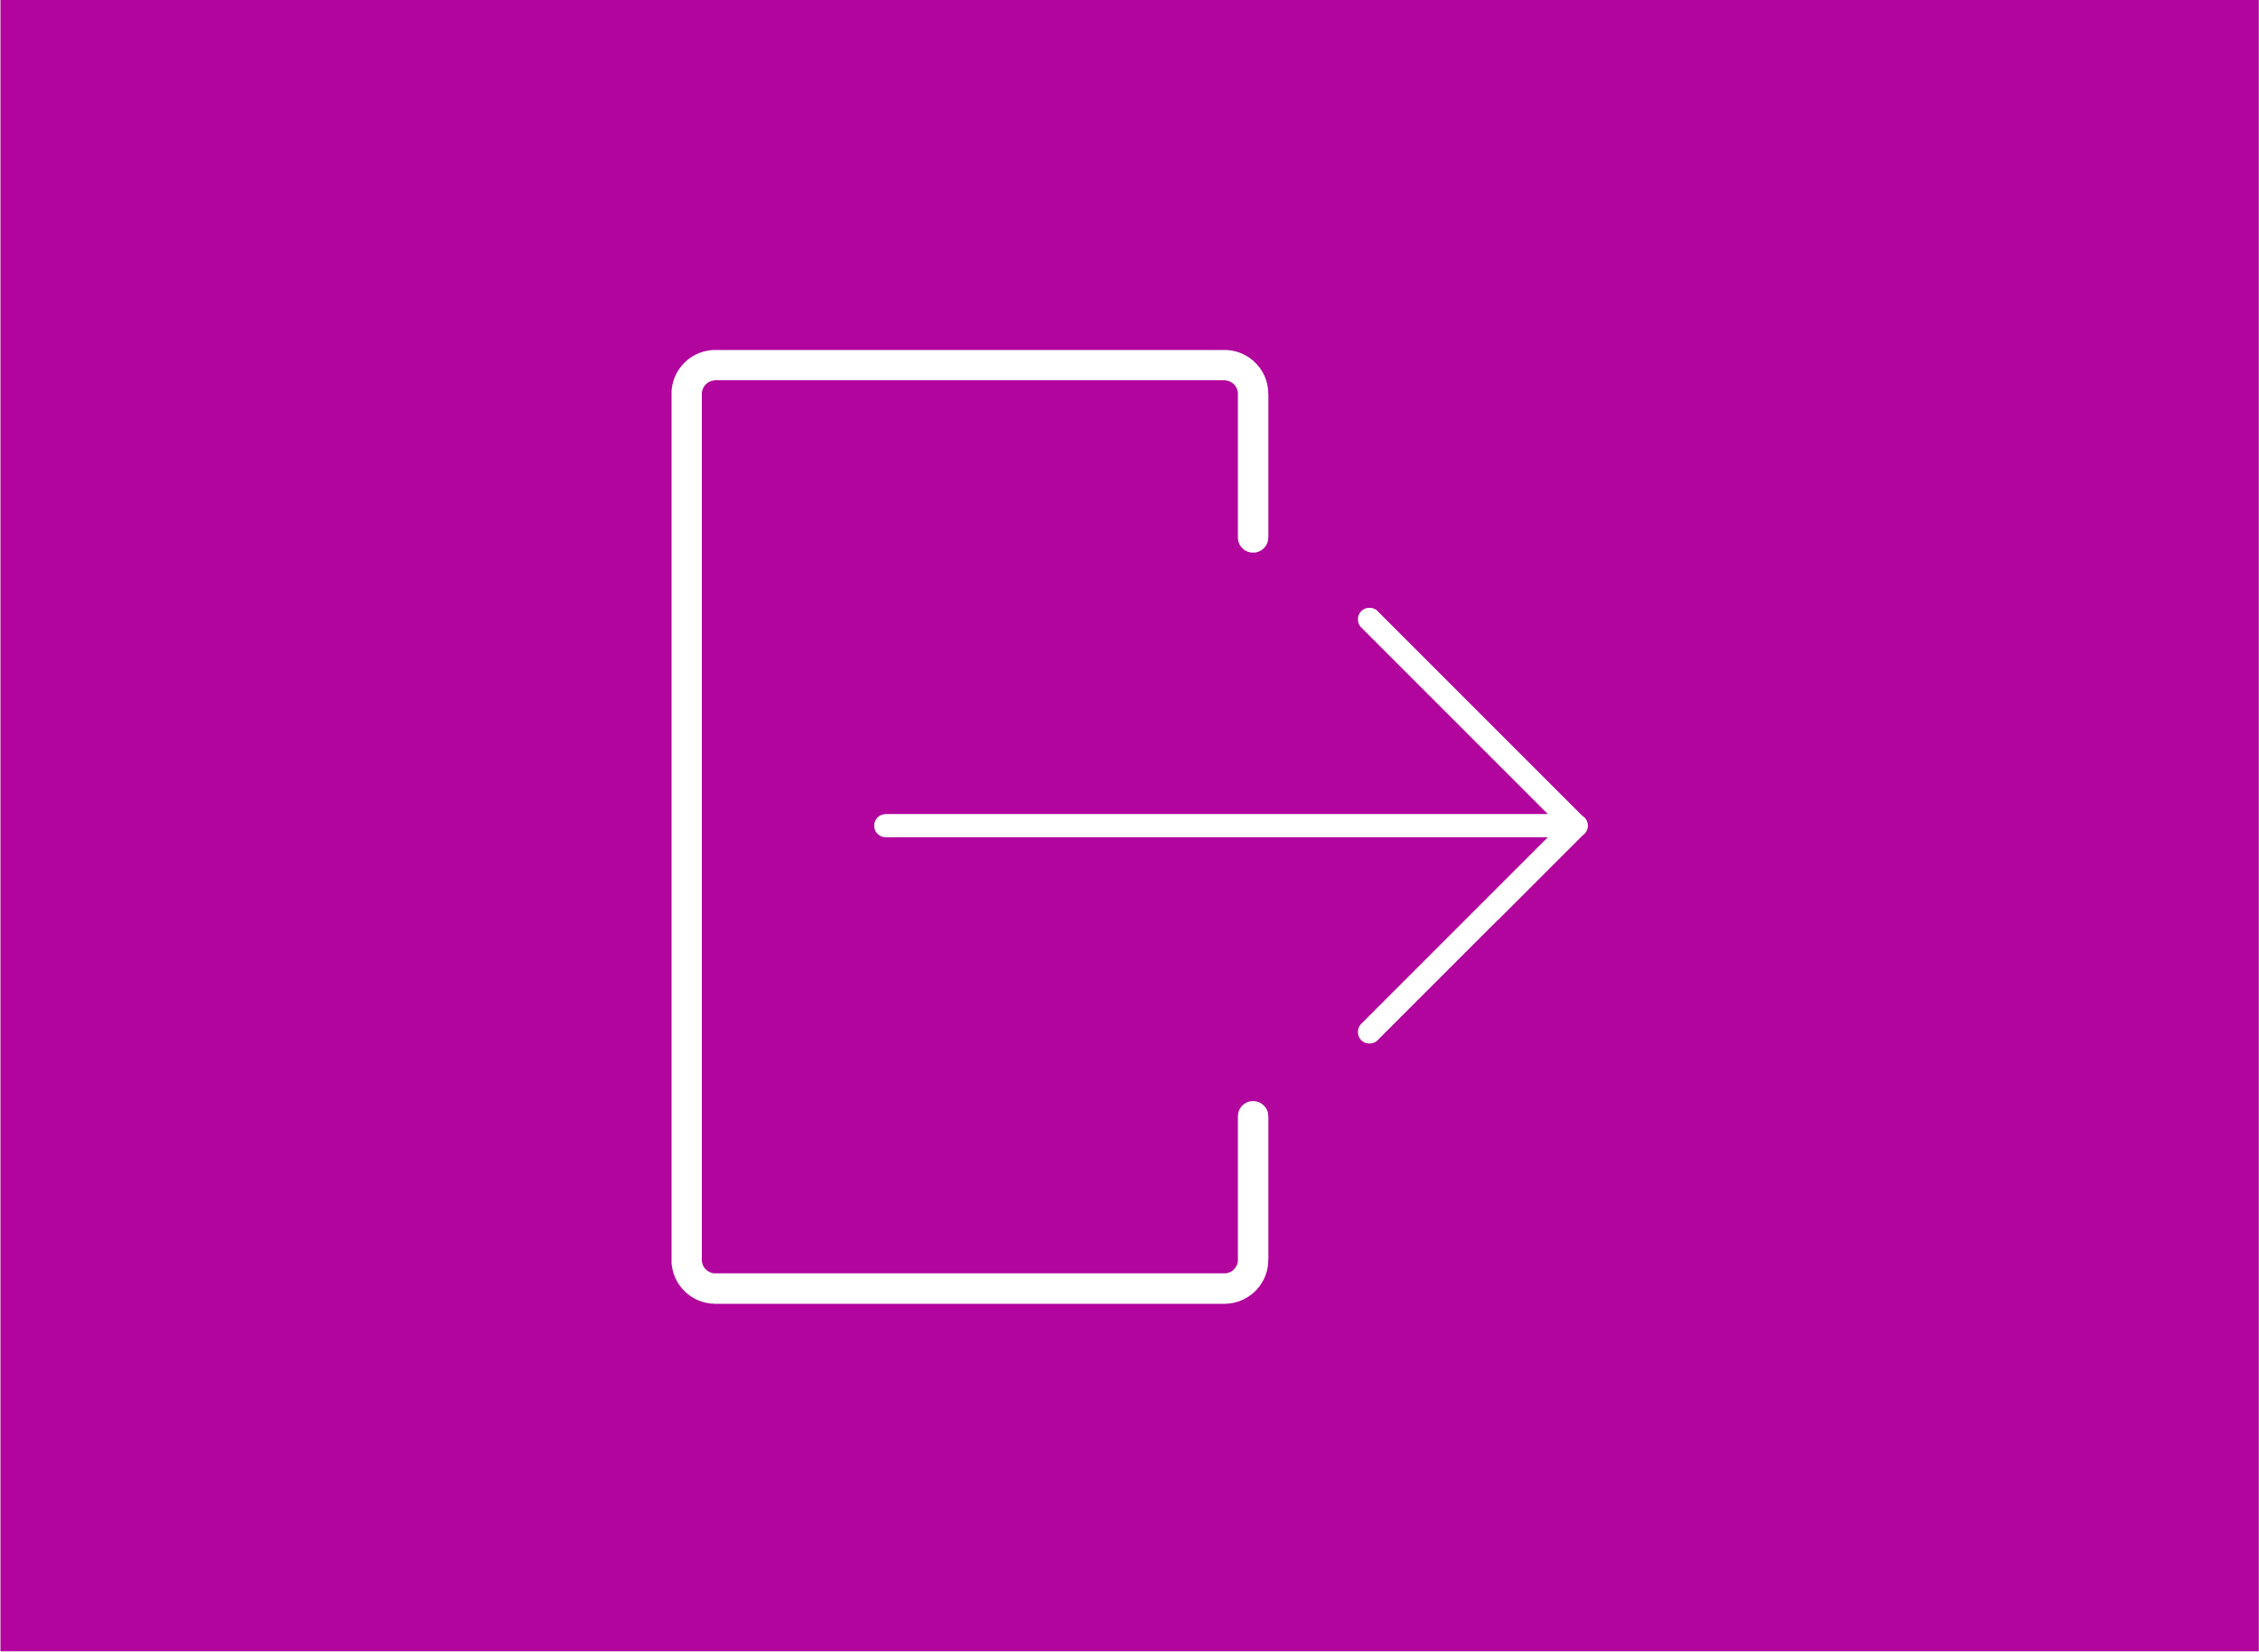 Purple icon of door with arrow pointing to the right